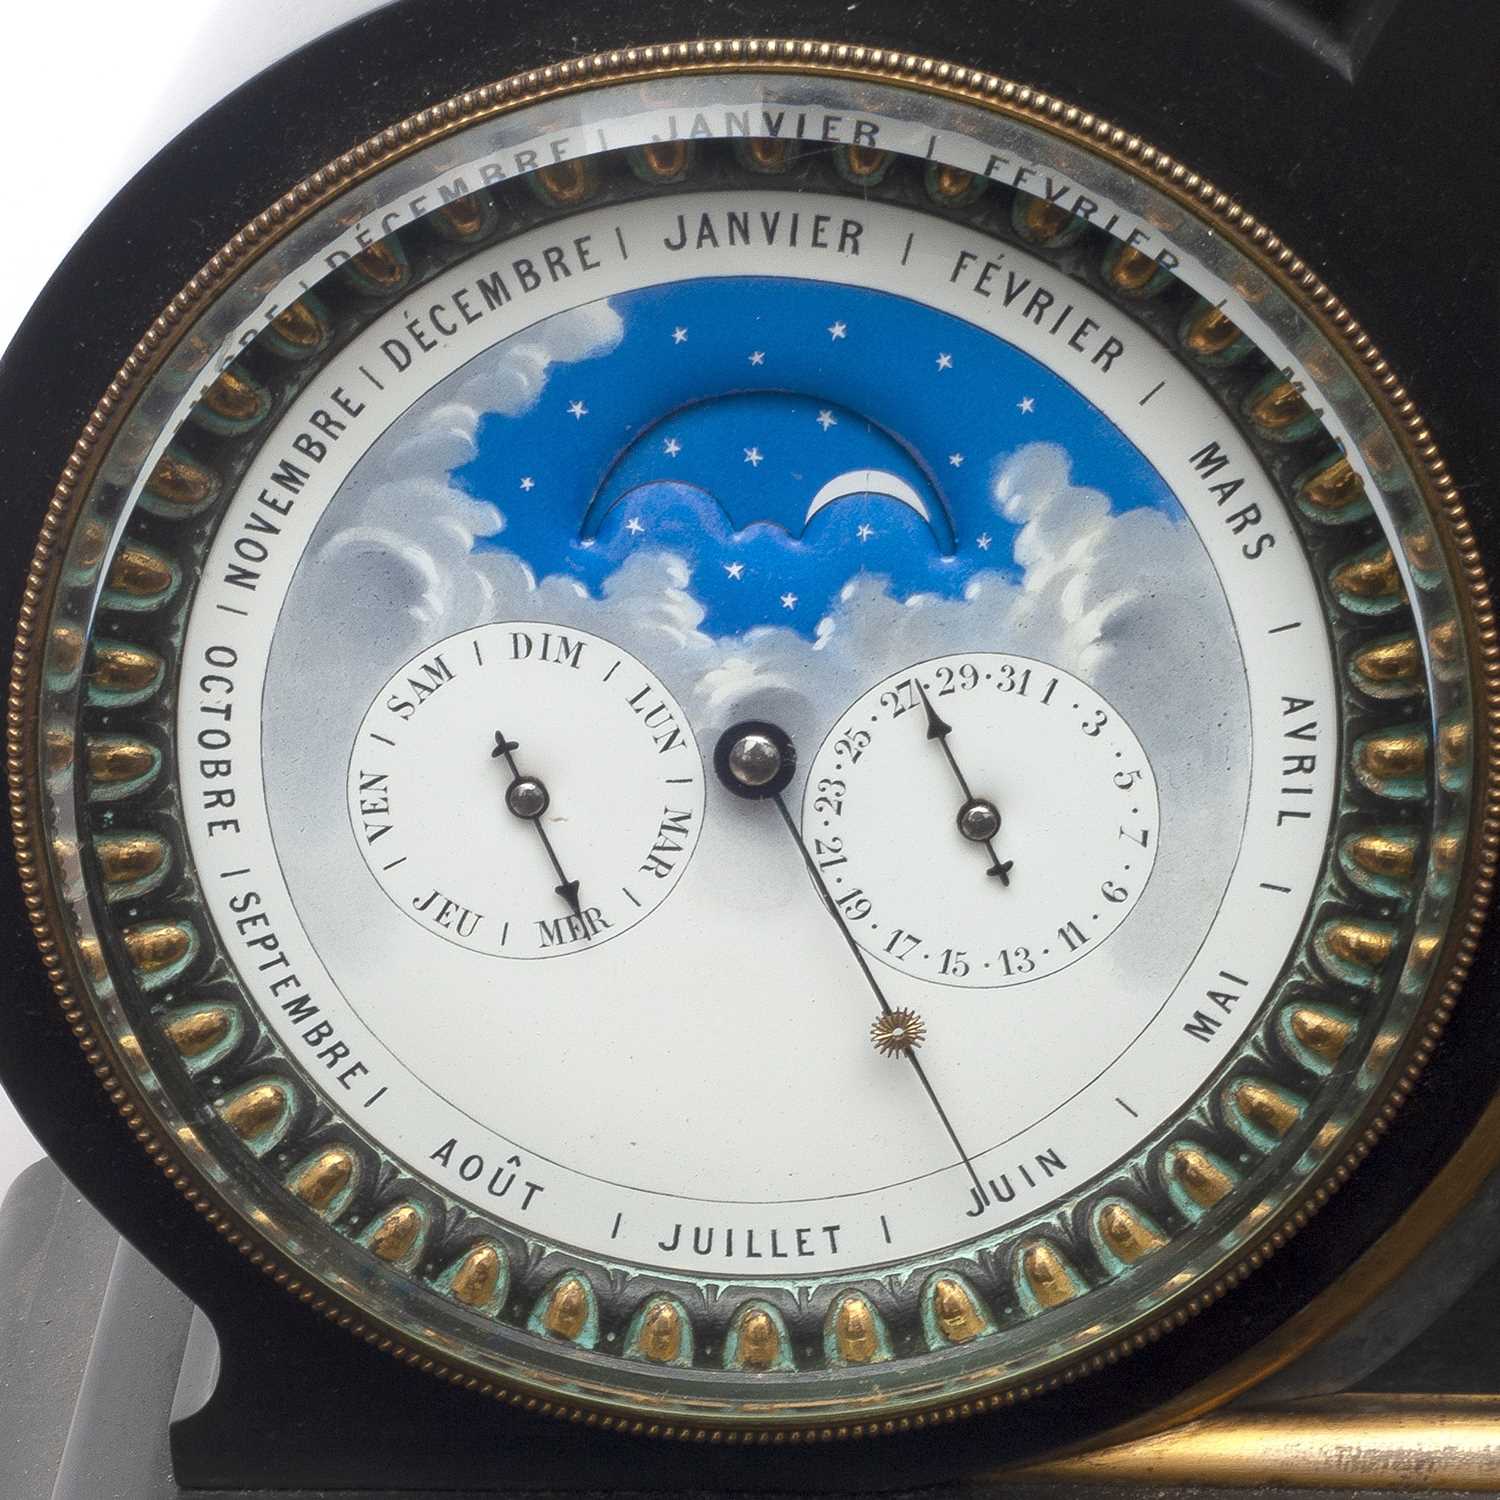 AN IMPRESSIVE 19TH CENTURY FRENCH PERPETUAL CALENDAR CLOCK WITH MOONPHASE AND BAROMETER - Image 4 of 6